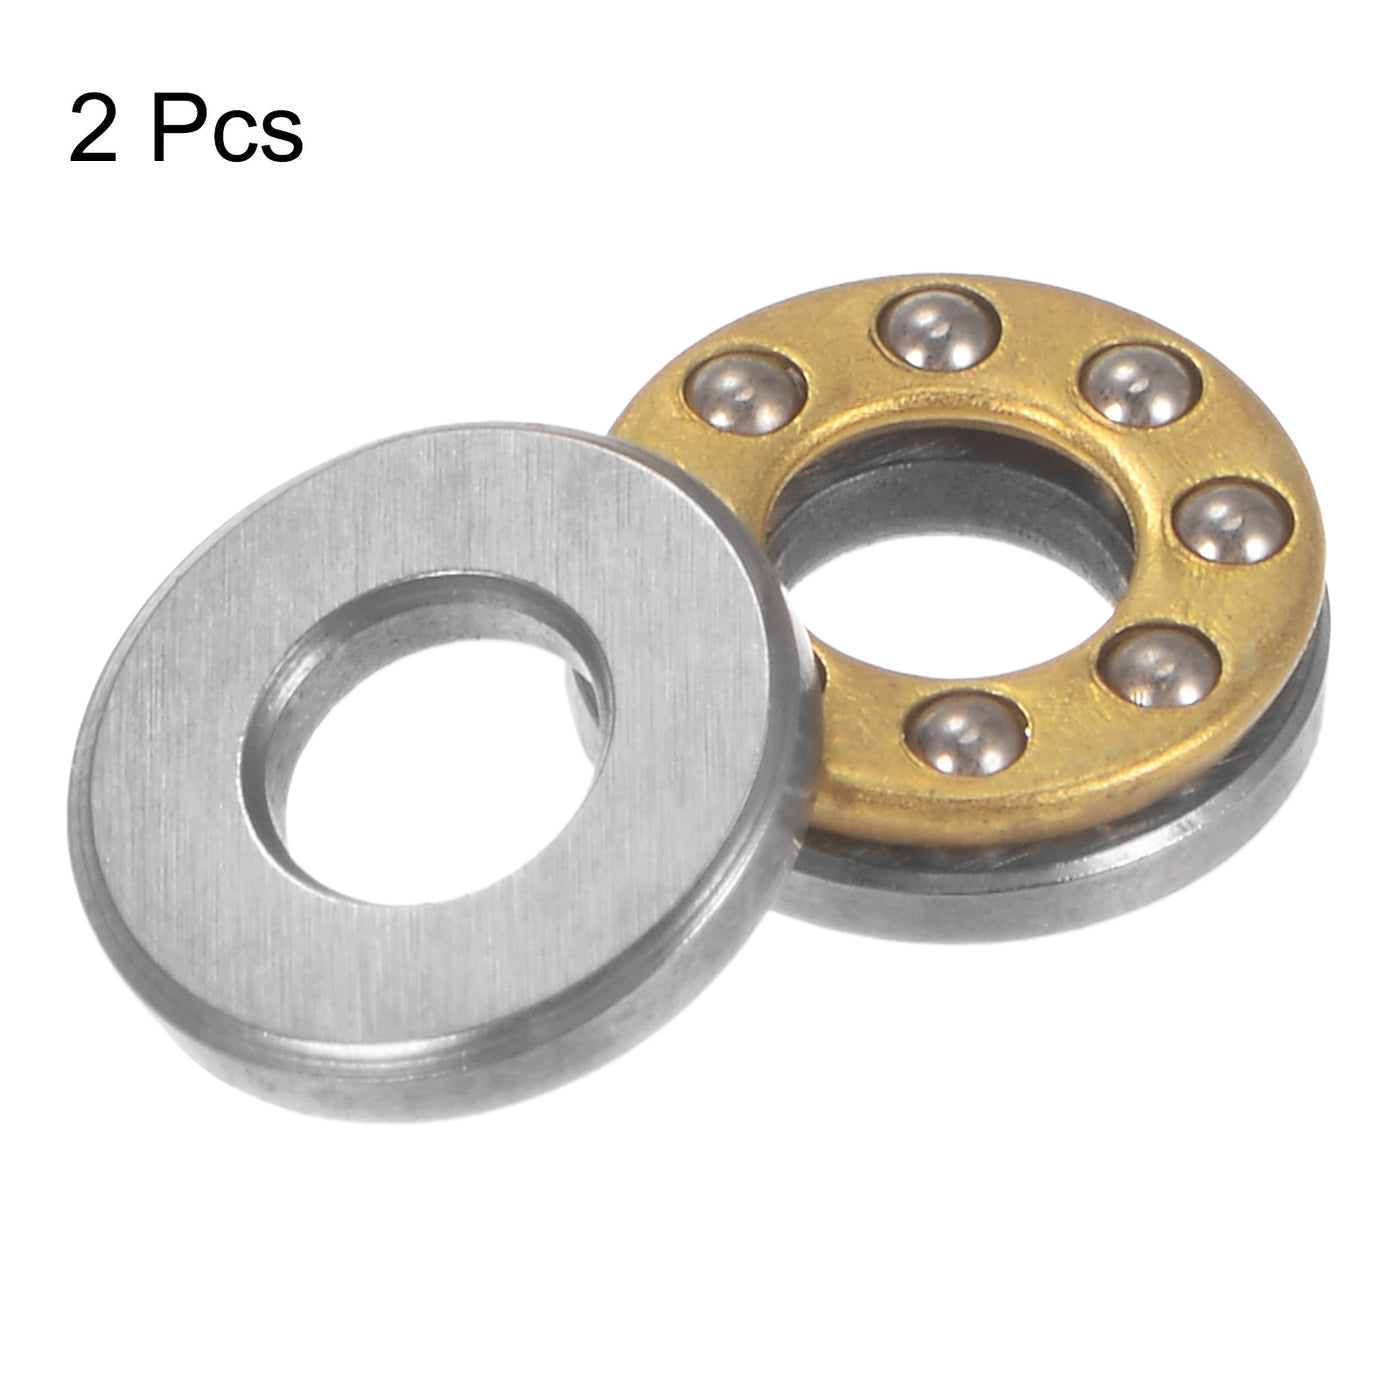 uxcell Uxcell F4-9M Thrust Ball Bearing 4x9x4mm Brass with Washers ABEC3 2pcs